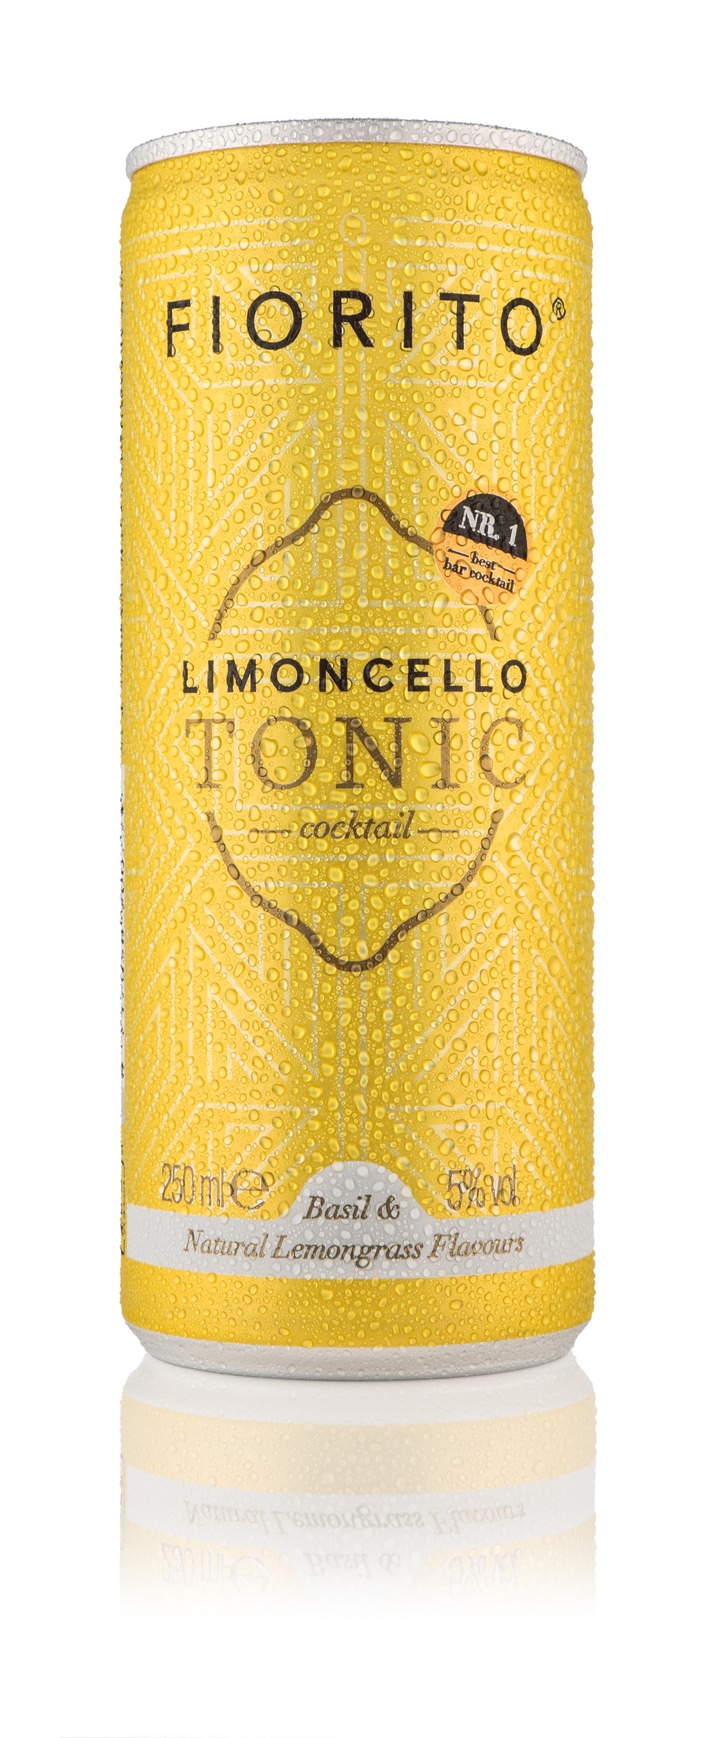 Dutch spirits company Fiorito launches Limoncello Tonic can / Refreshing summer drink available as ready-to-drink option for first time